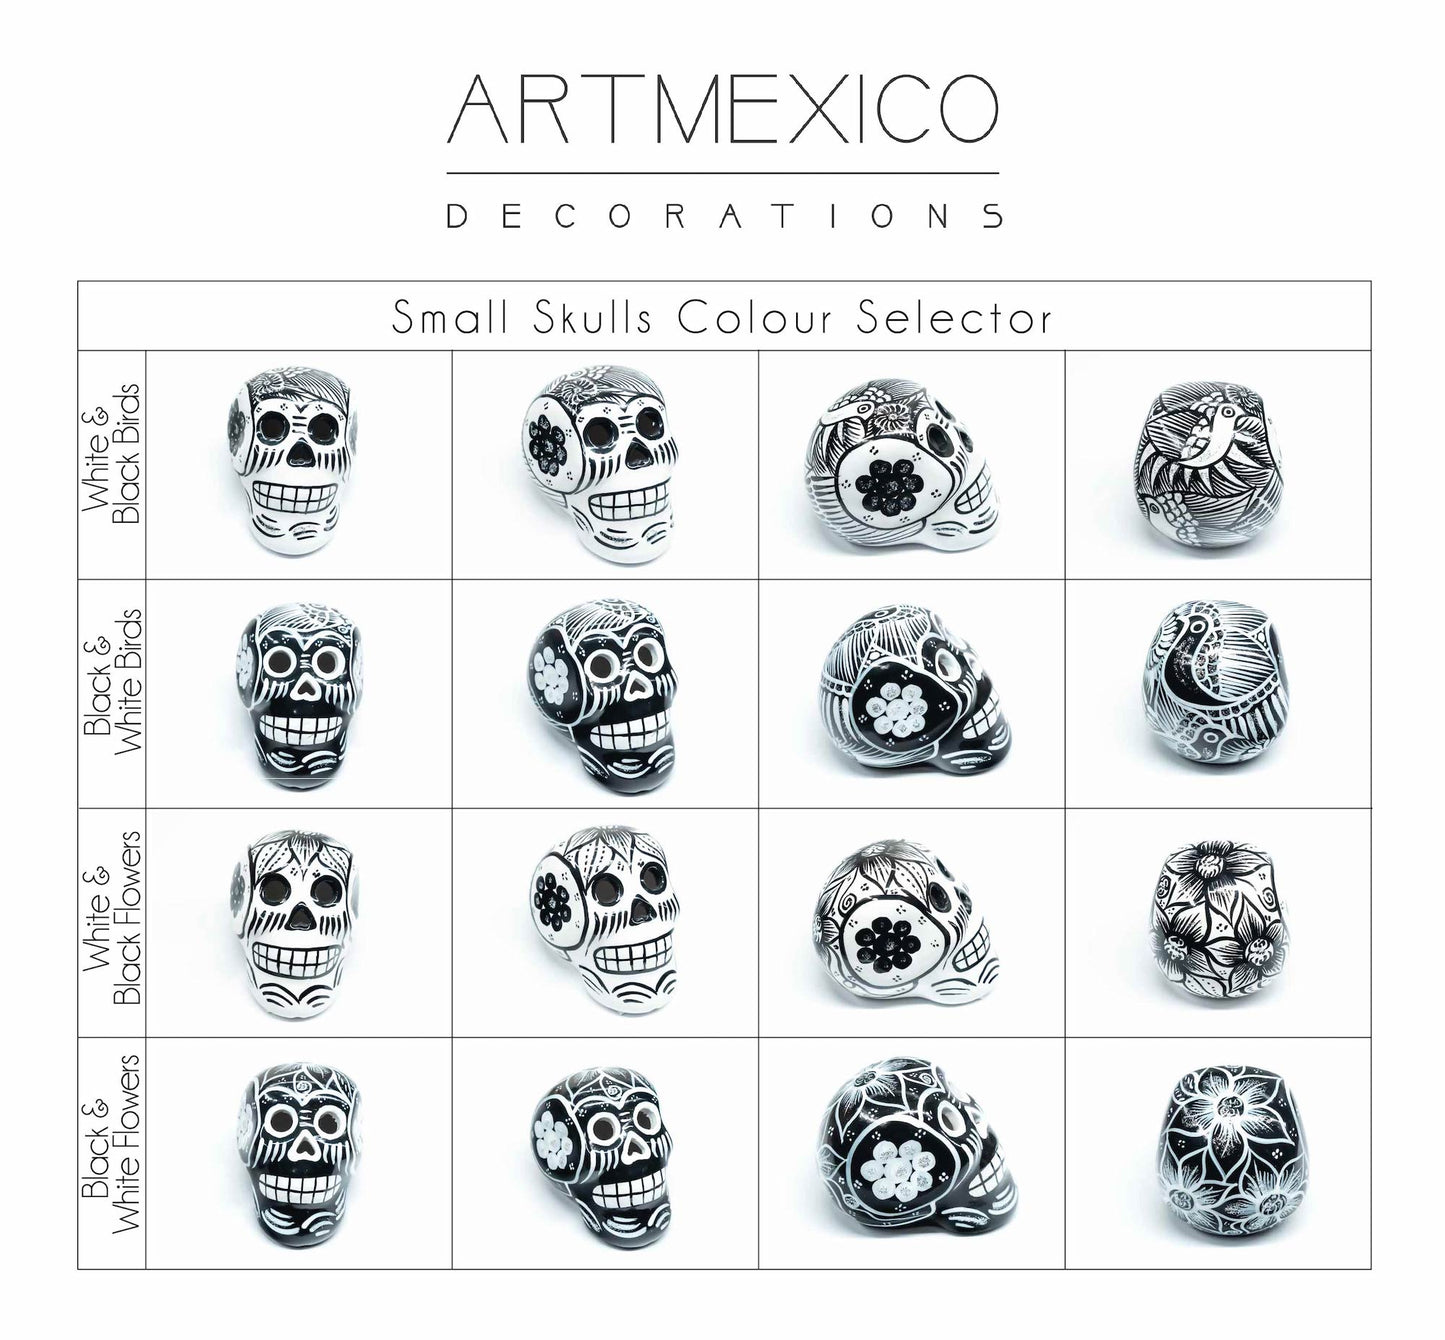 50 Small Mexican Ceramic Skulls Wholesale, Day of the Dead Decorations, Individually Gift Boxed